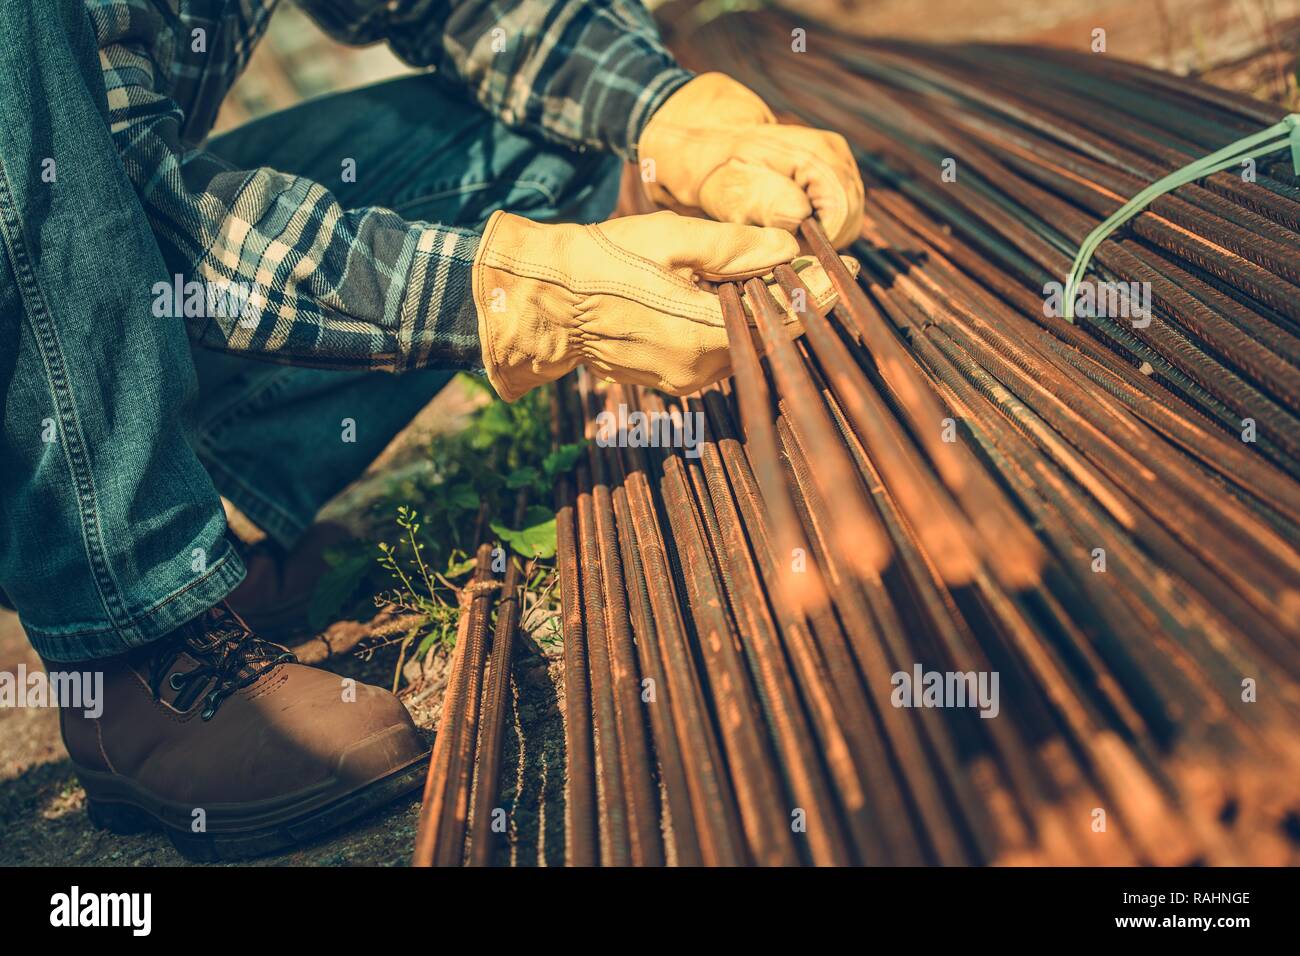 Construction Industry. Steel Reinforcement Bars on a Ground. Contractors Hands on the Steel Elements. Stock Photo